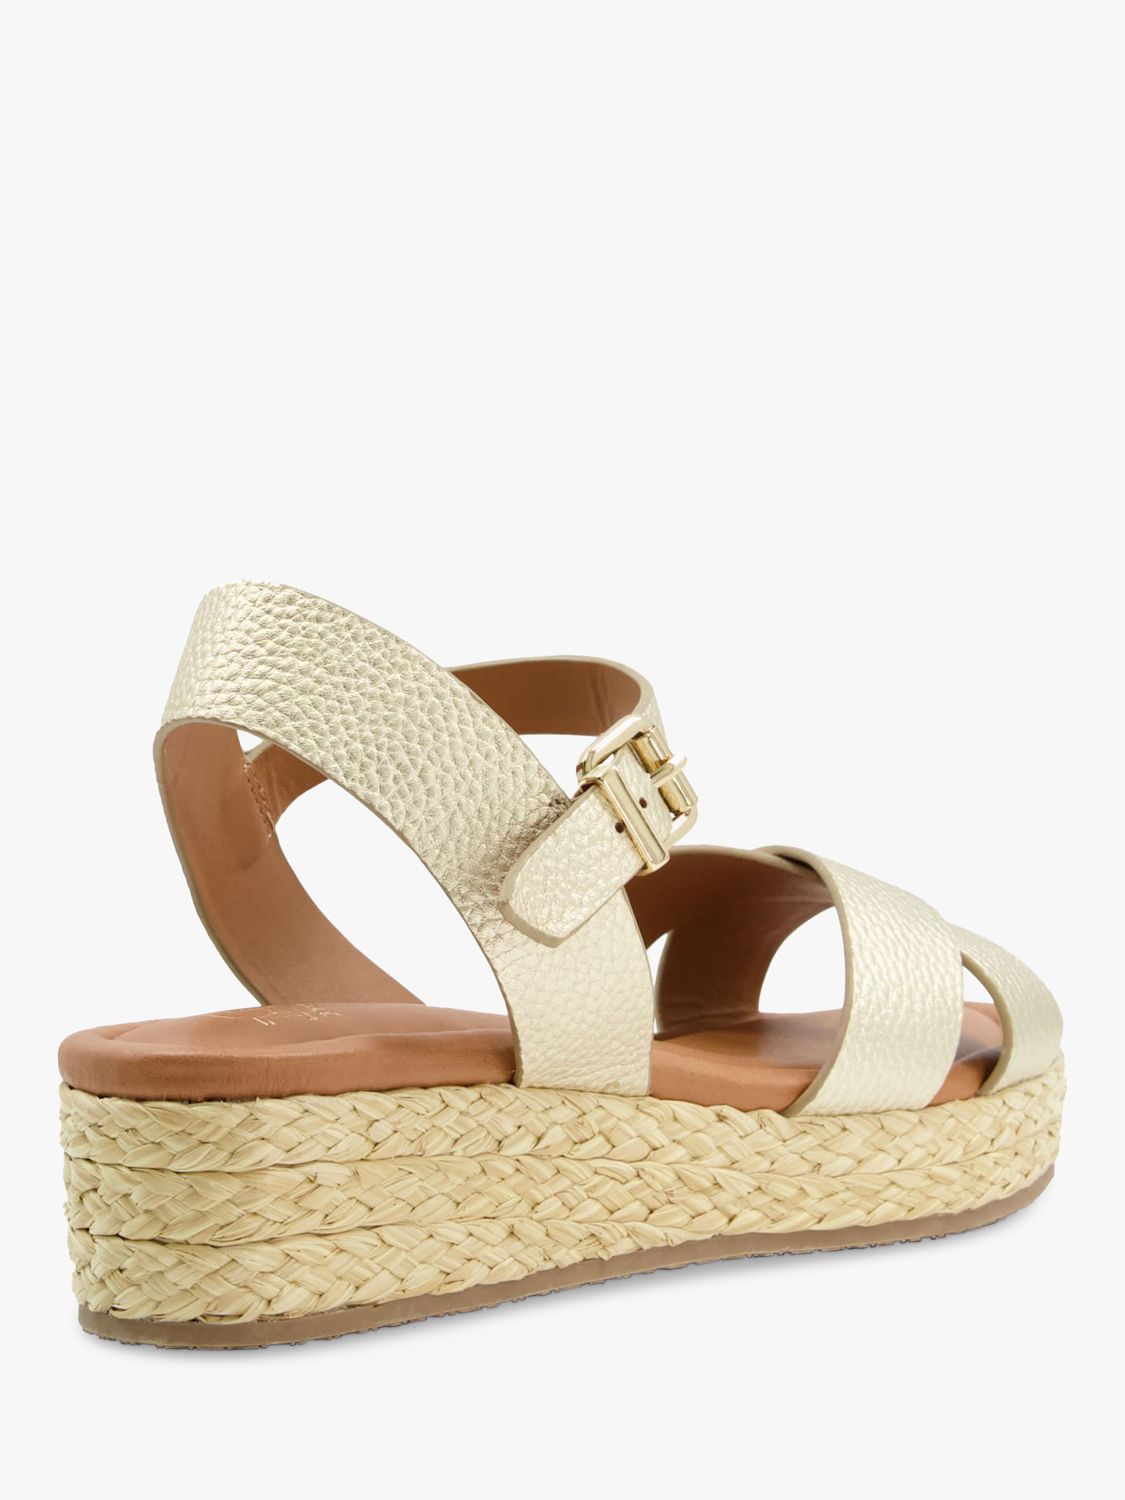 Dune Linnie Leather Cross Strap Sandals, Gold at John Lewis & Partners